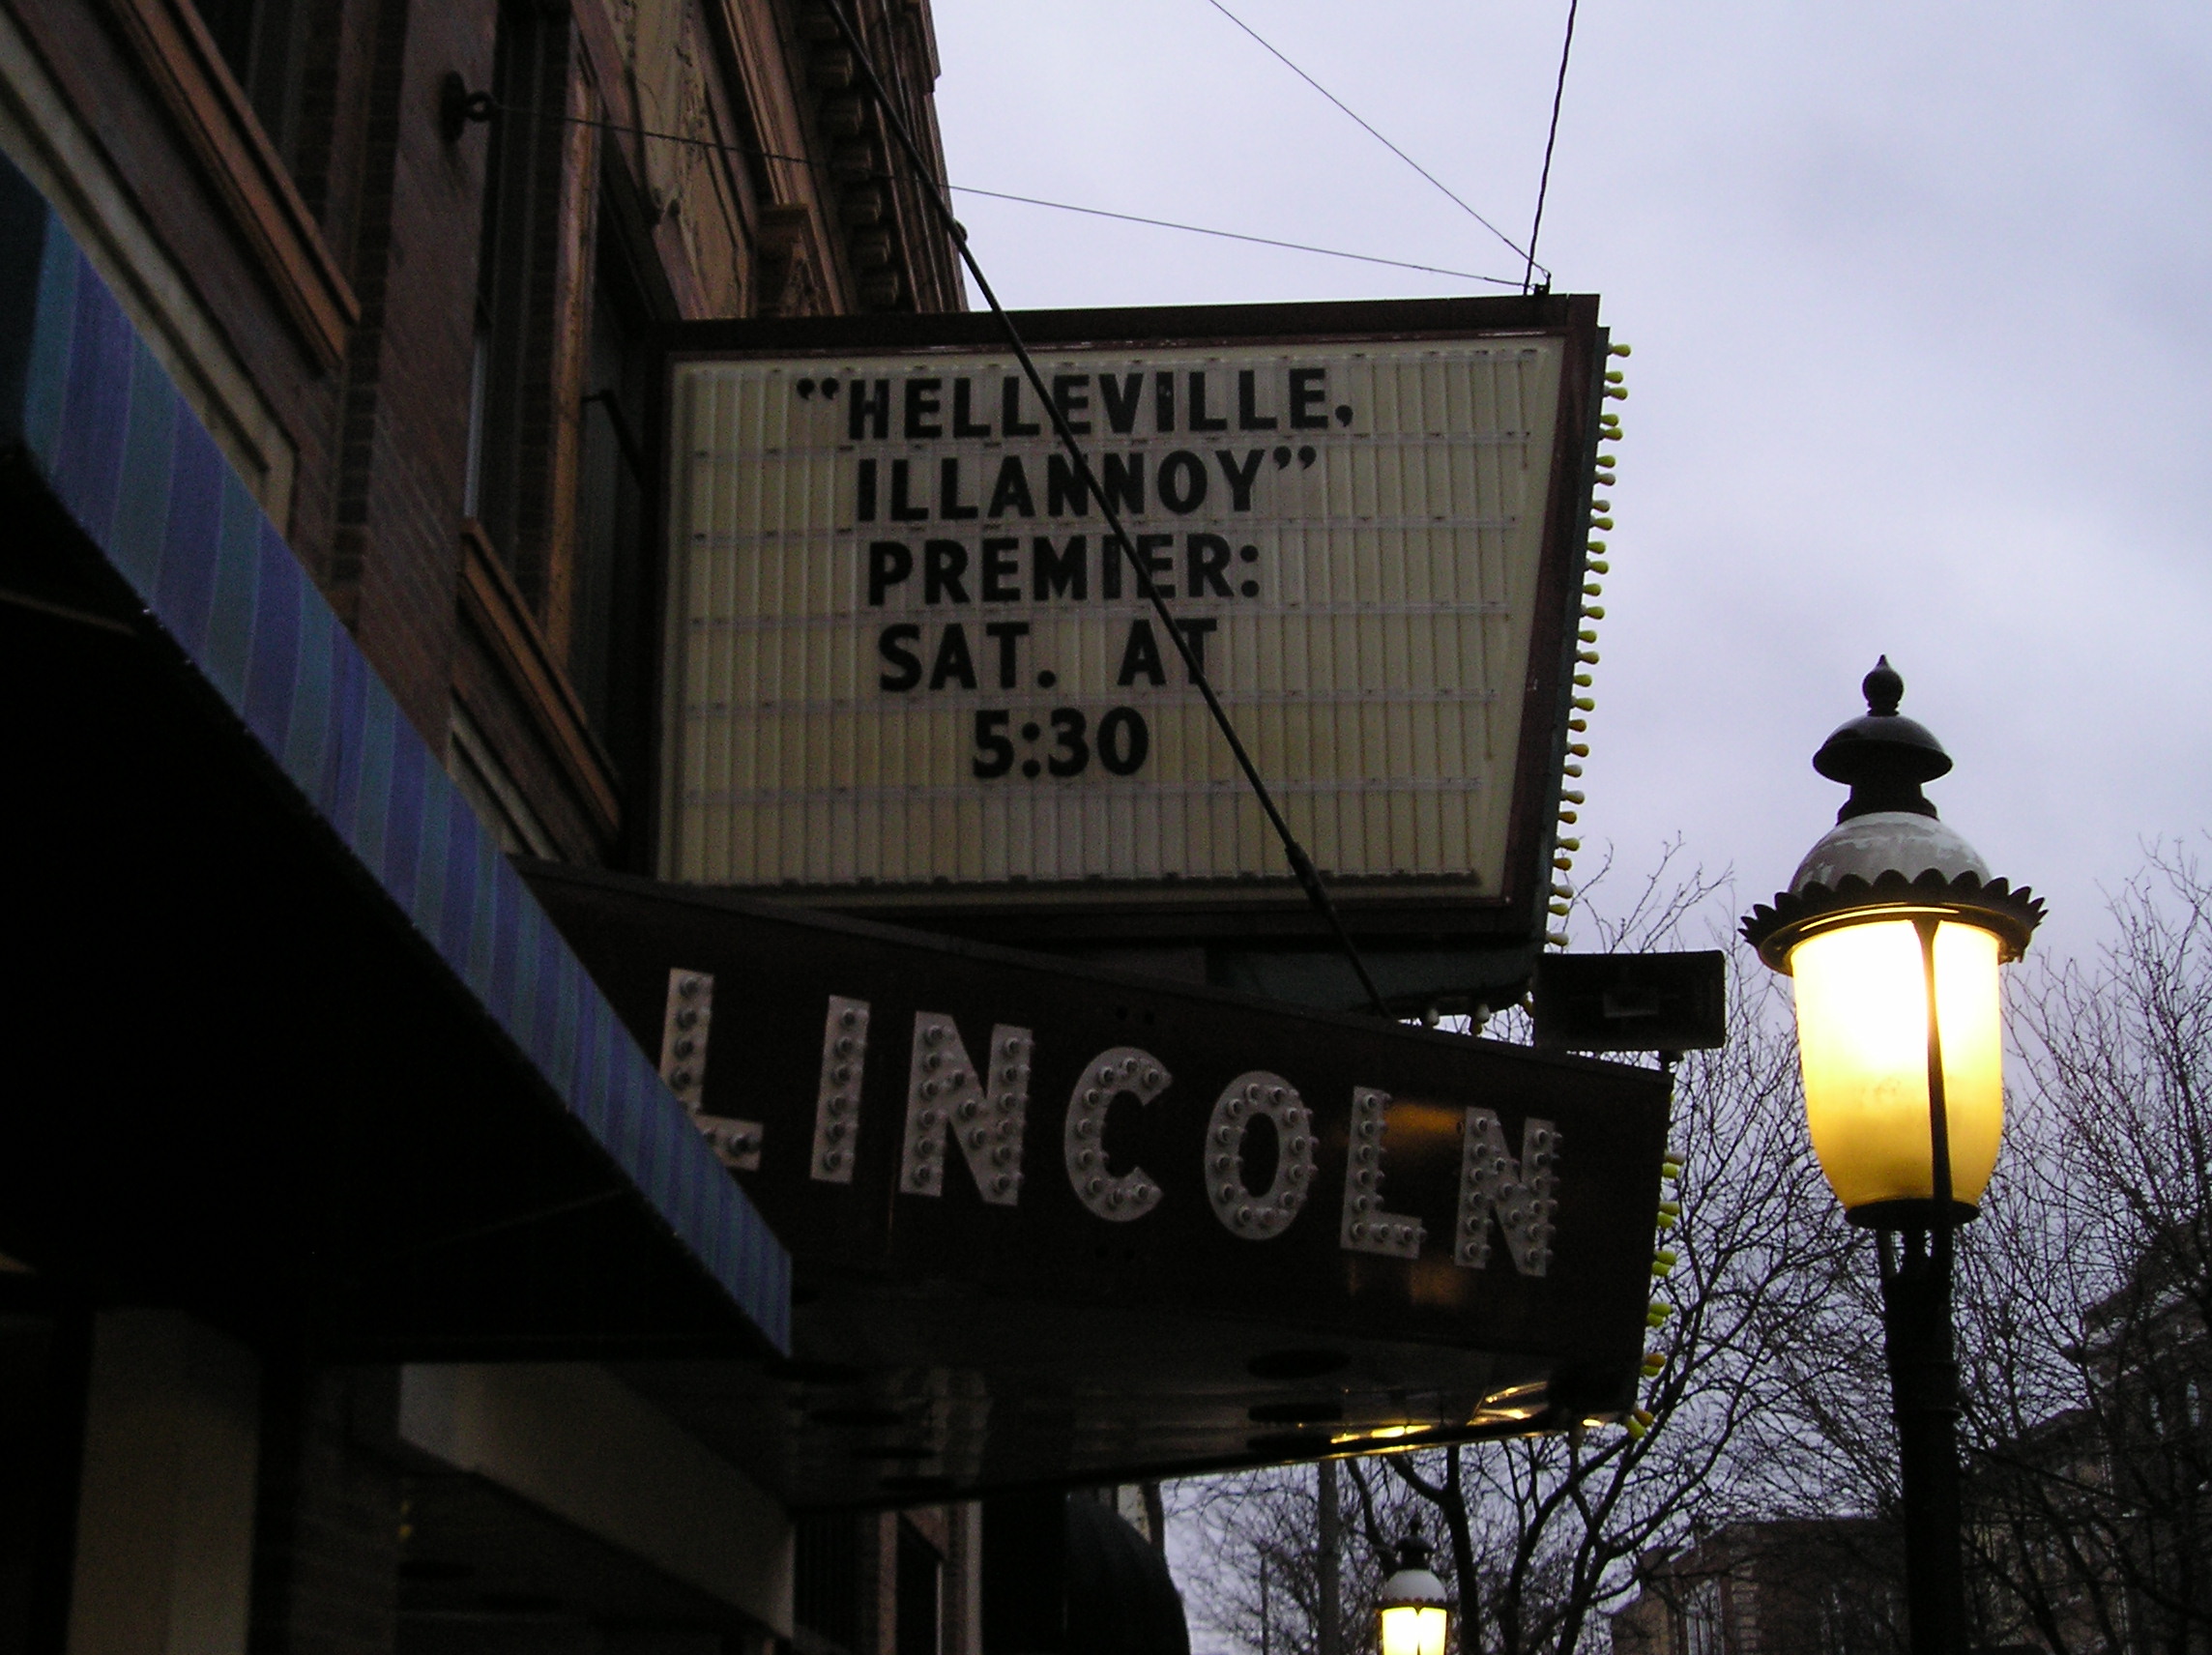 The first nobudgetmovies movie premier at The Lincoln Theater, Belleville, IL. 2006